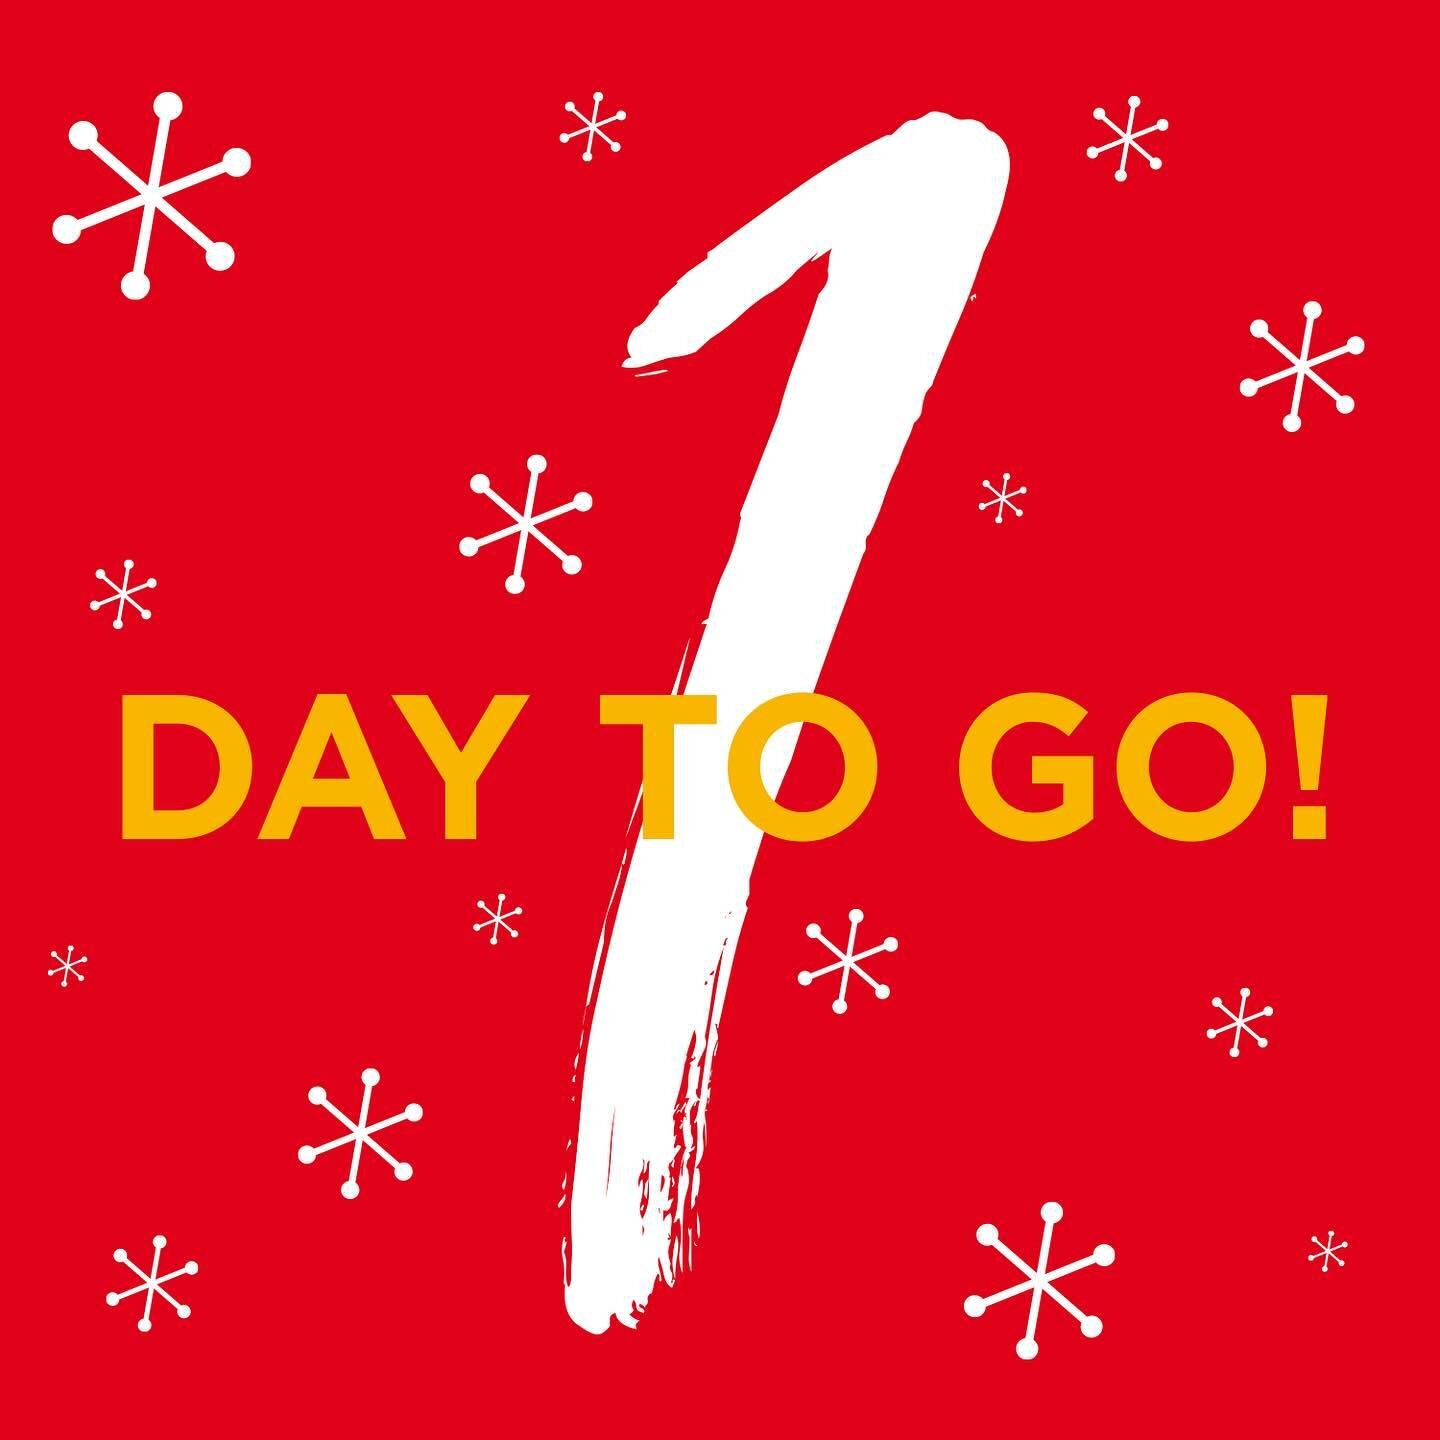 ALMOST TIME&hellip;
You know what&rsquo;s coming! We can&rsquo;t wait to see you all there FROM 10AM tomorrow! May the final countdown begin&hellip;

The weather is looking fabulous and there&rsquo;s so much to look forward to:

- Over 60 unique stal